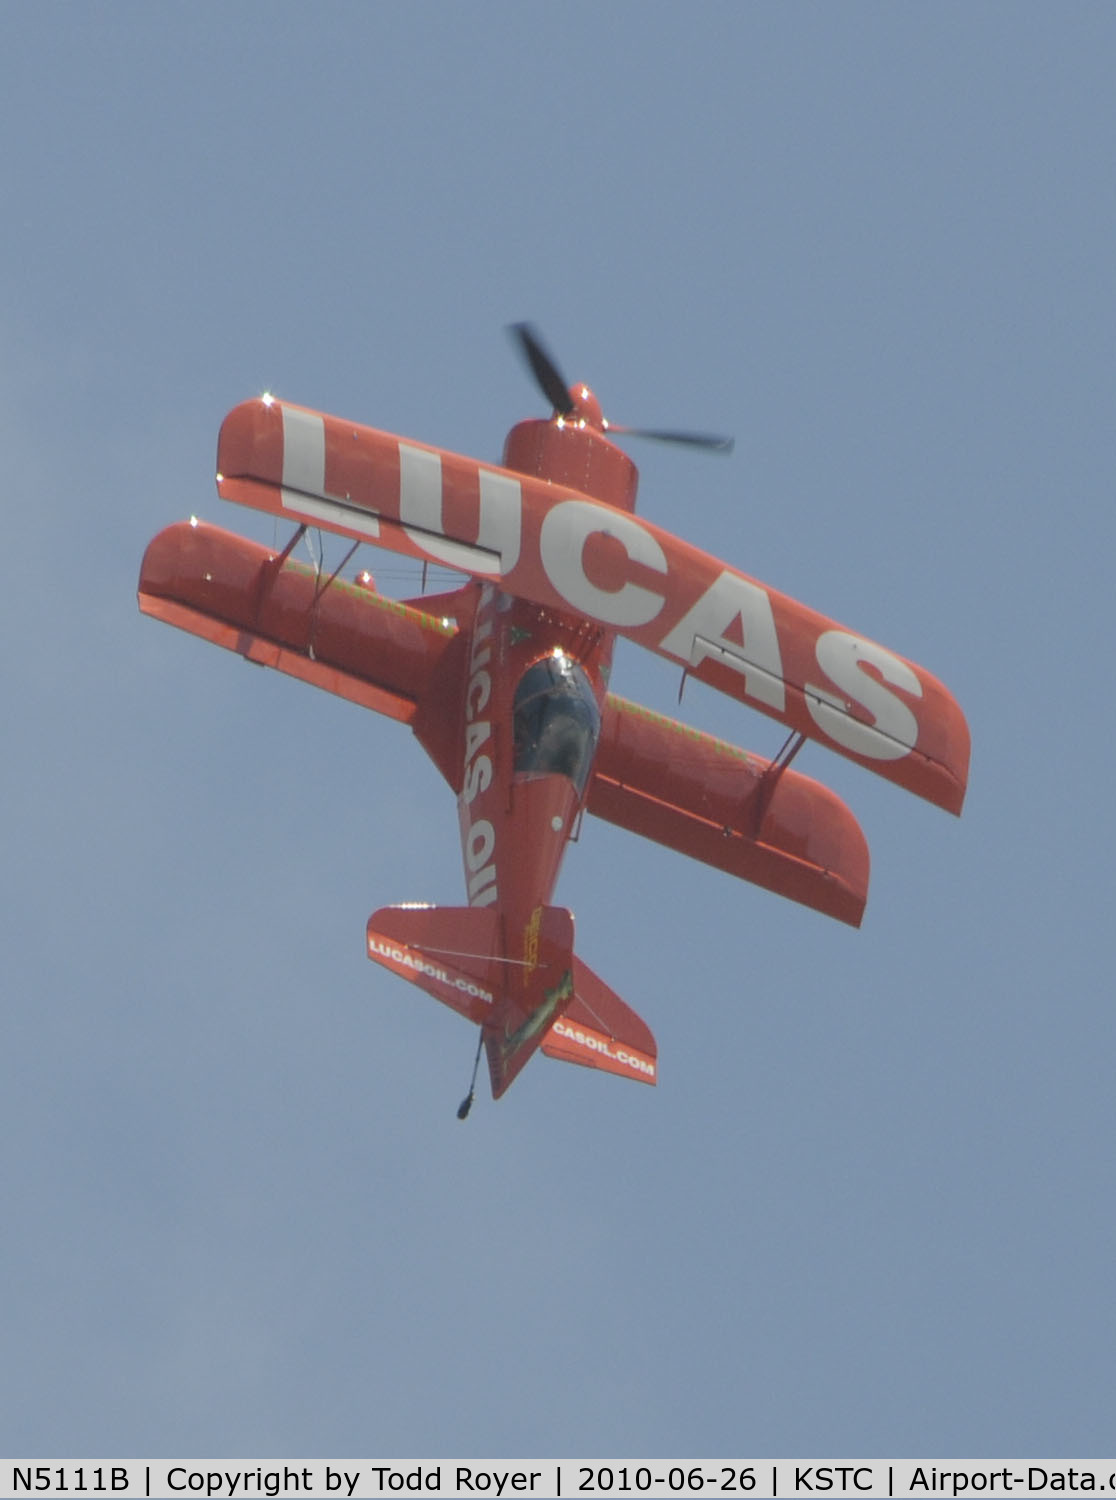 N5111B, 1998 Pitts S-1-11B Super Stinker C/N 4003, performing at the 2010 Great Minnesota Air Show